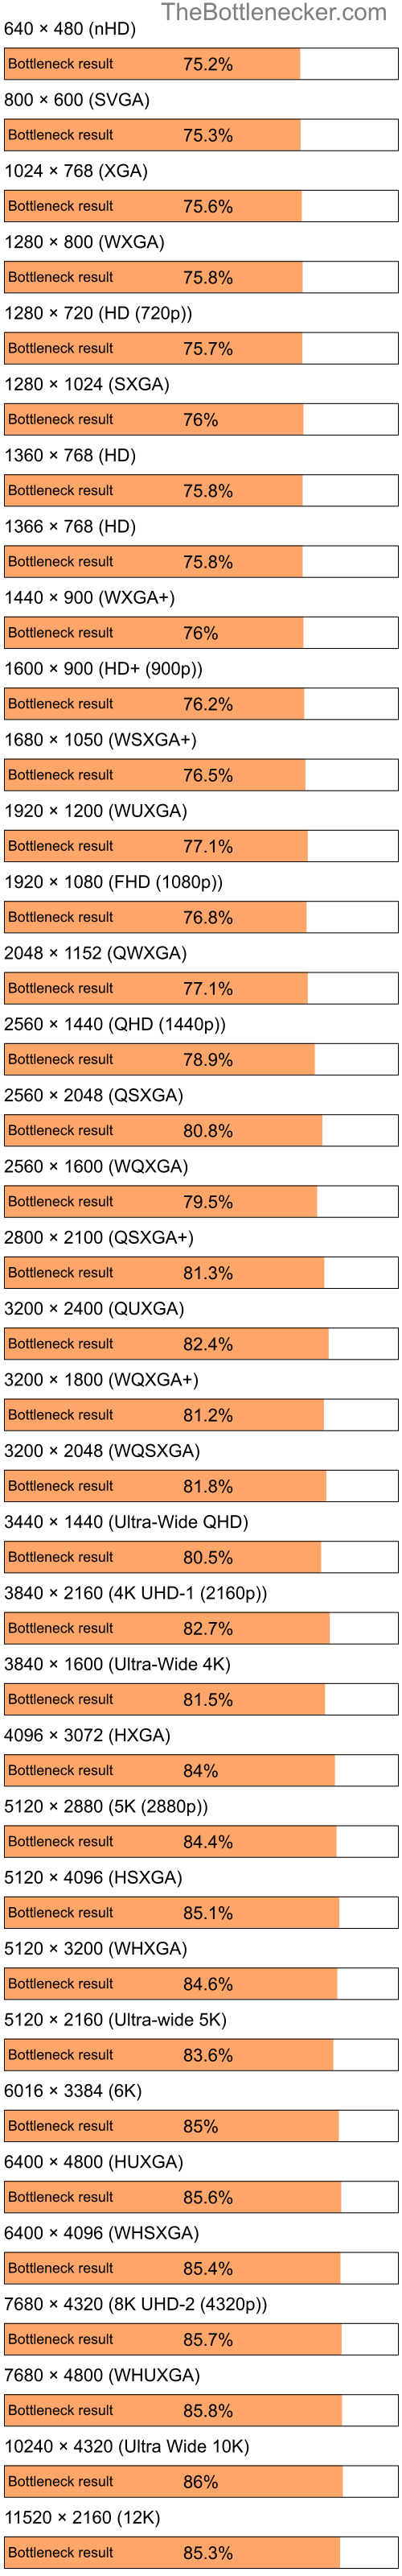 Bottleneck results by resolution for Intel Atom Z520 and AMD Mobility Radeon X300 in General Tasks